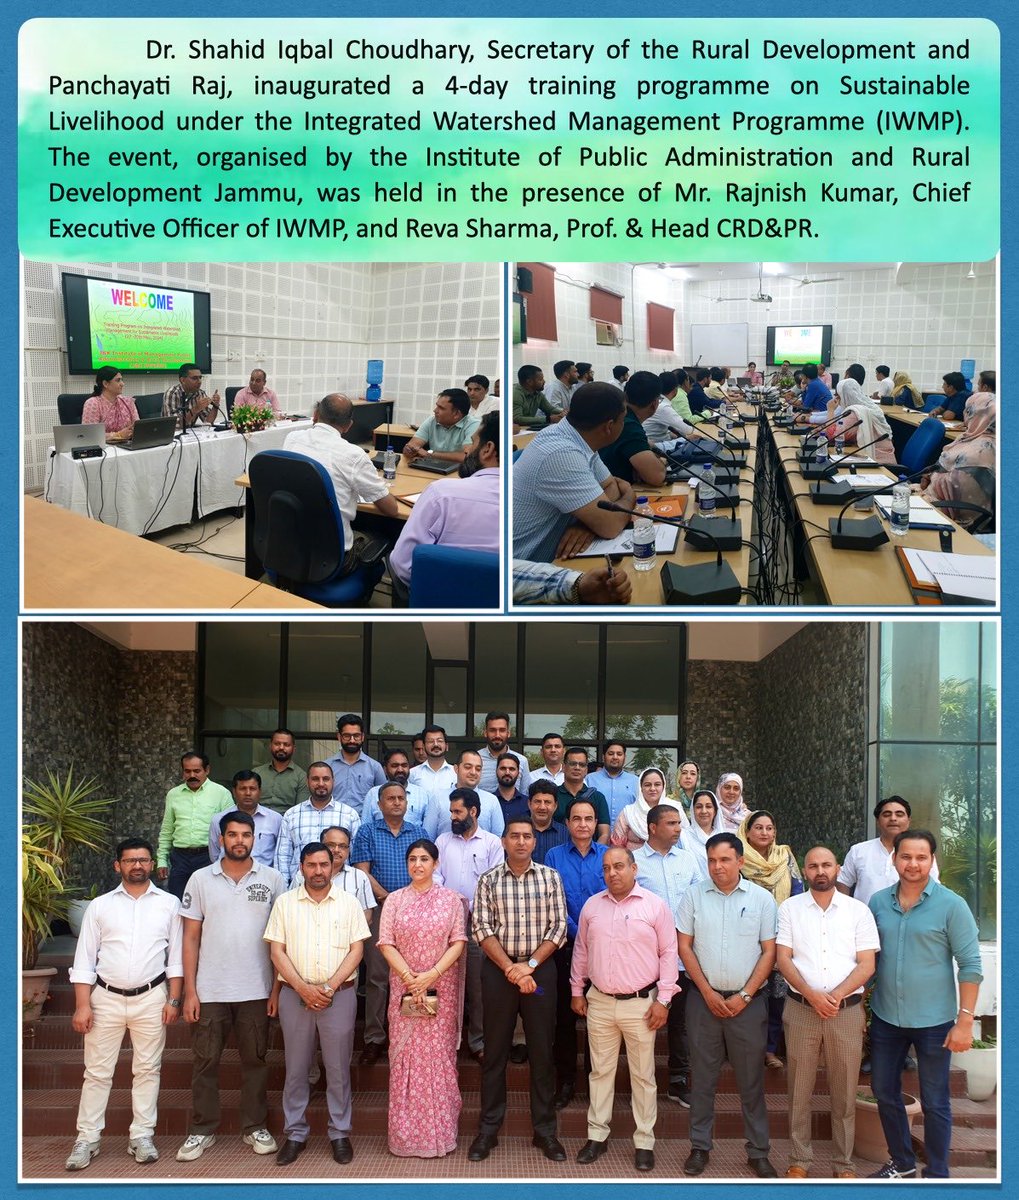 Dr. Shahid Iqbal Choudhary, Secy. #RDPR inaugurated a 4-day training on #SustainableLivelihood under #IWMP ,organized by #IMPARD #Jammu. #CEOIWMP Mr. Rajnish Kumar & Prof. Reva Sharma were present. Project Managers #BDOs & #DLTEs participated ⁦⁦@mopr_goi @listenshahid @ANI